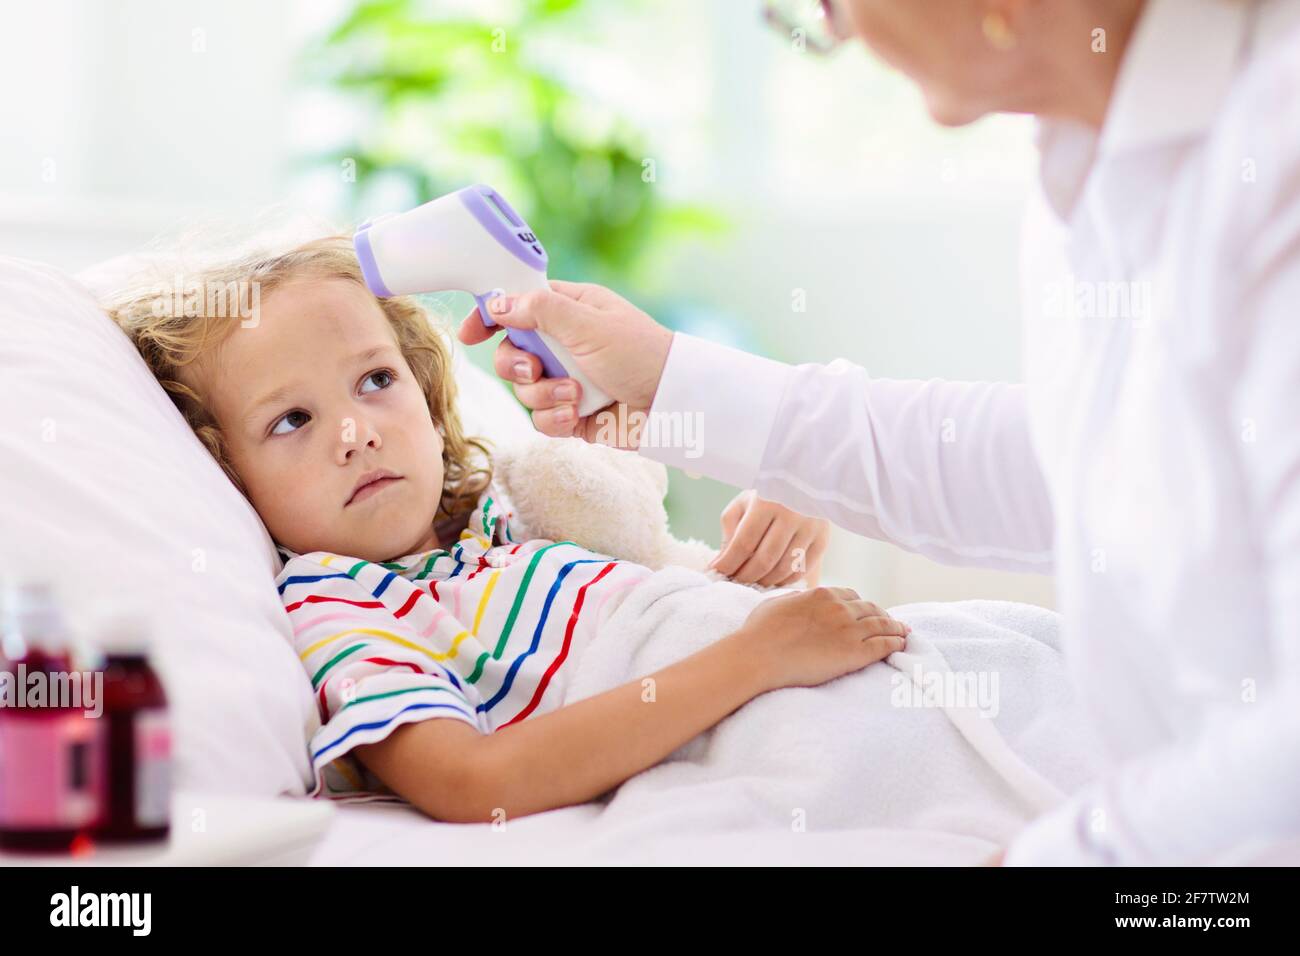 Sick little boy with medicine. Mother checking fever of ill child in bed. Unwell kid with chamber inhaler for asthma cough treatment. Flu season. Stock Photo